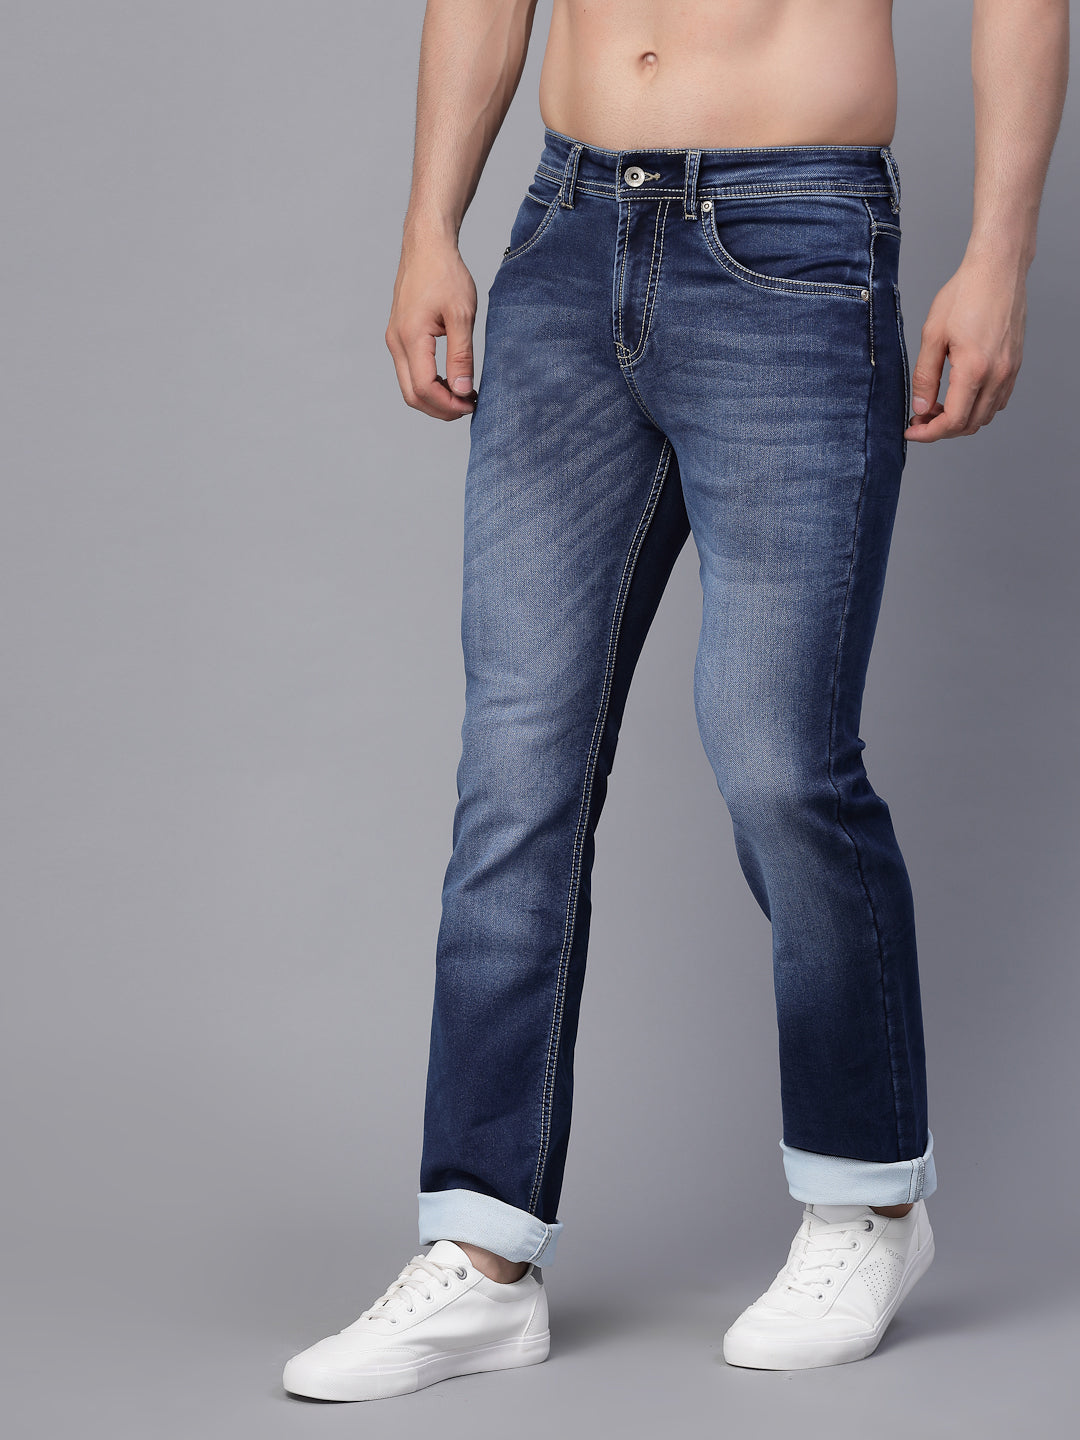 Mens Blue Cotton Solid Cuffing Jeans